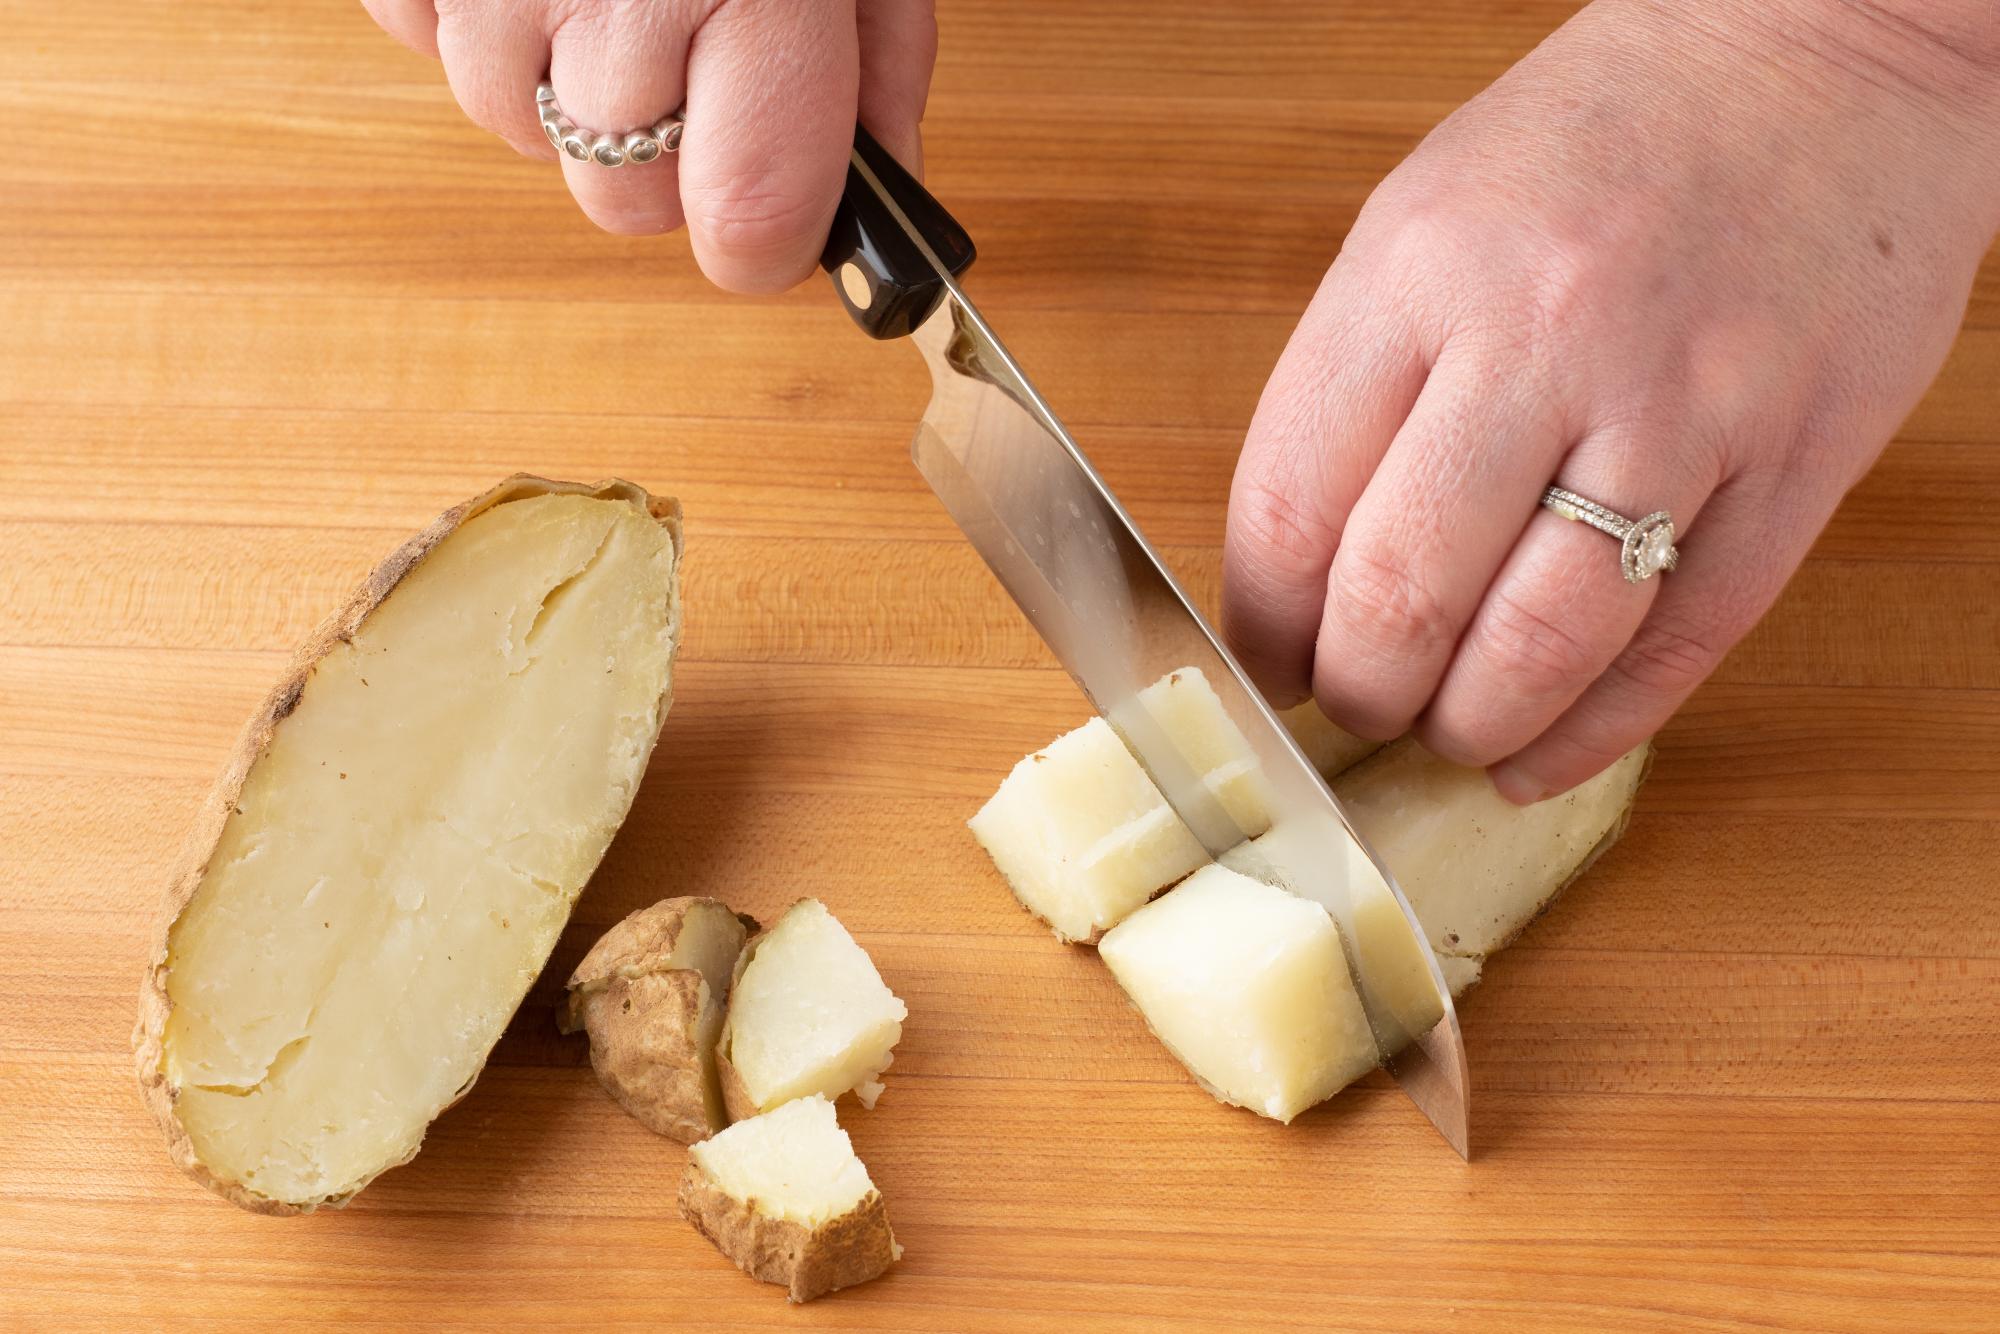 Cutting the potatoes into cubes with a Petite Santoku.